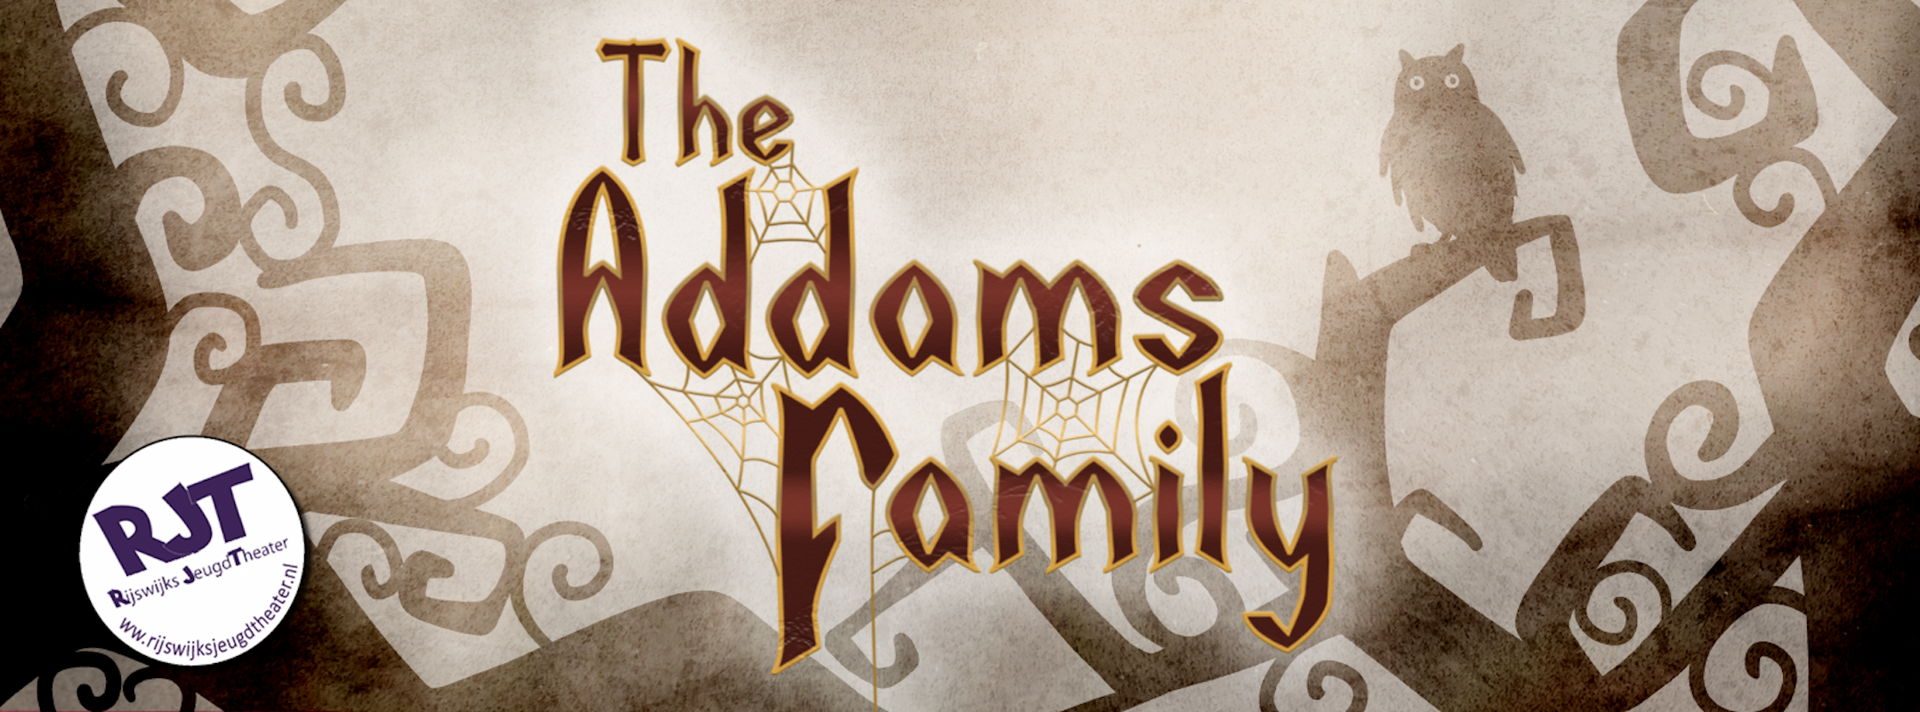 Foto voor 'The Addams Family'